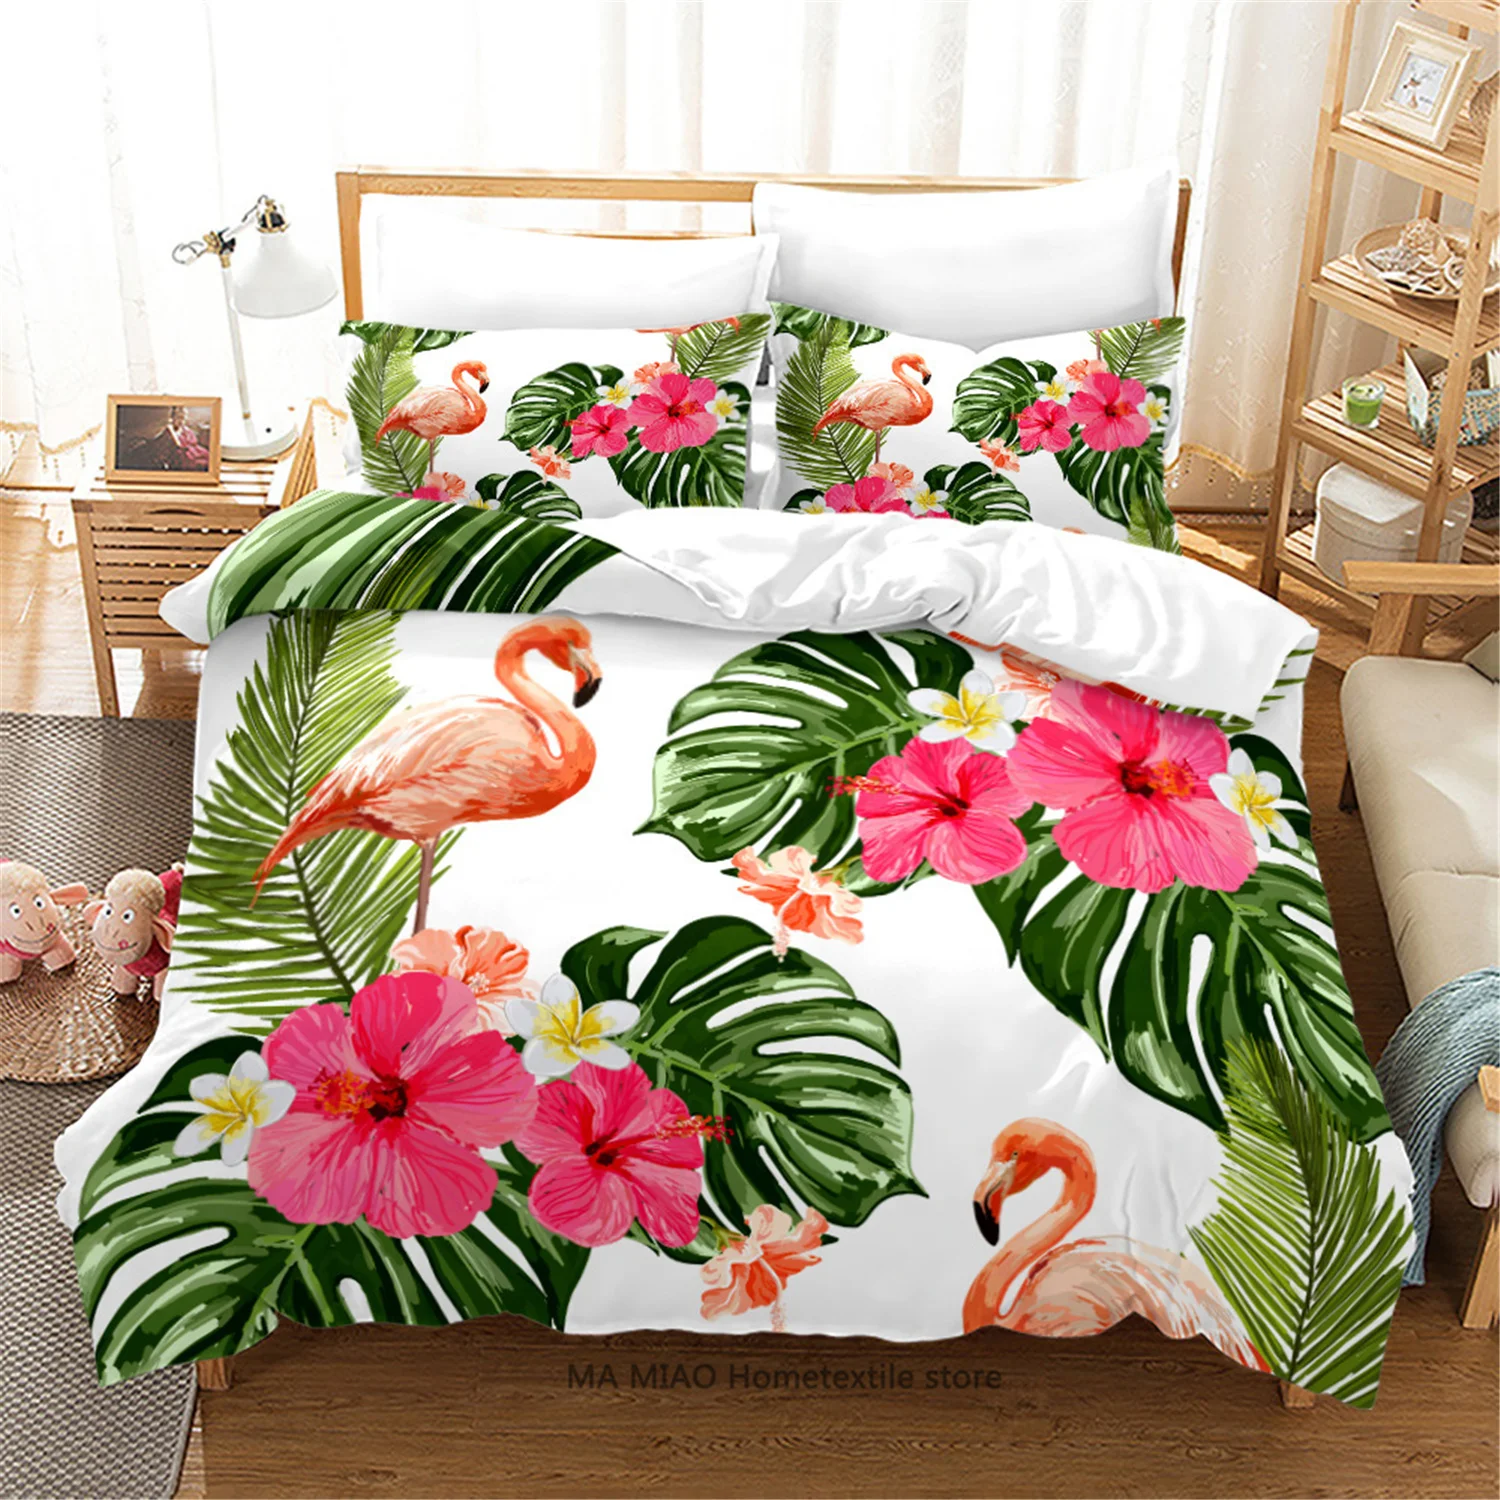 

3D Printed Pink Flamingo Bedding Sets 2/3Pcs Duvet Cover Set Single/Twin/Full/Double/Queen/King Size Quilt Cover Pillowcases